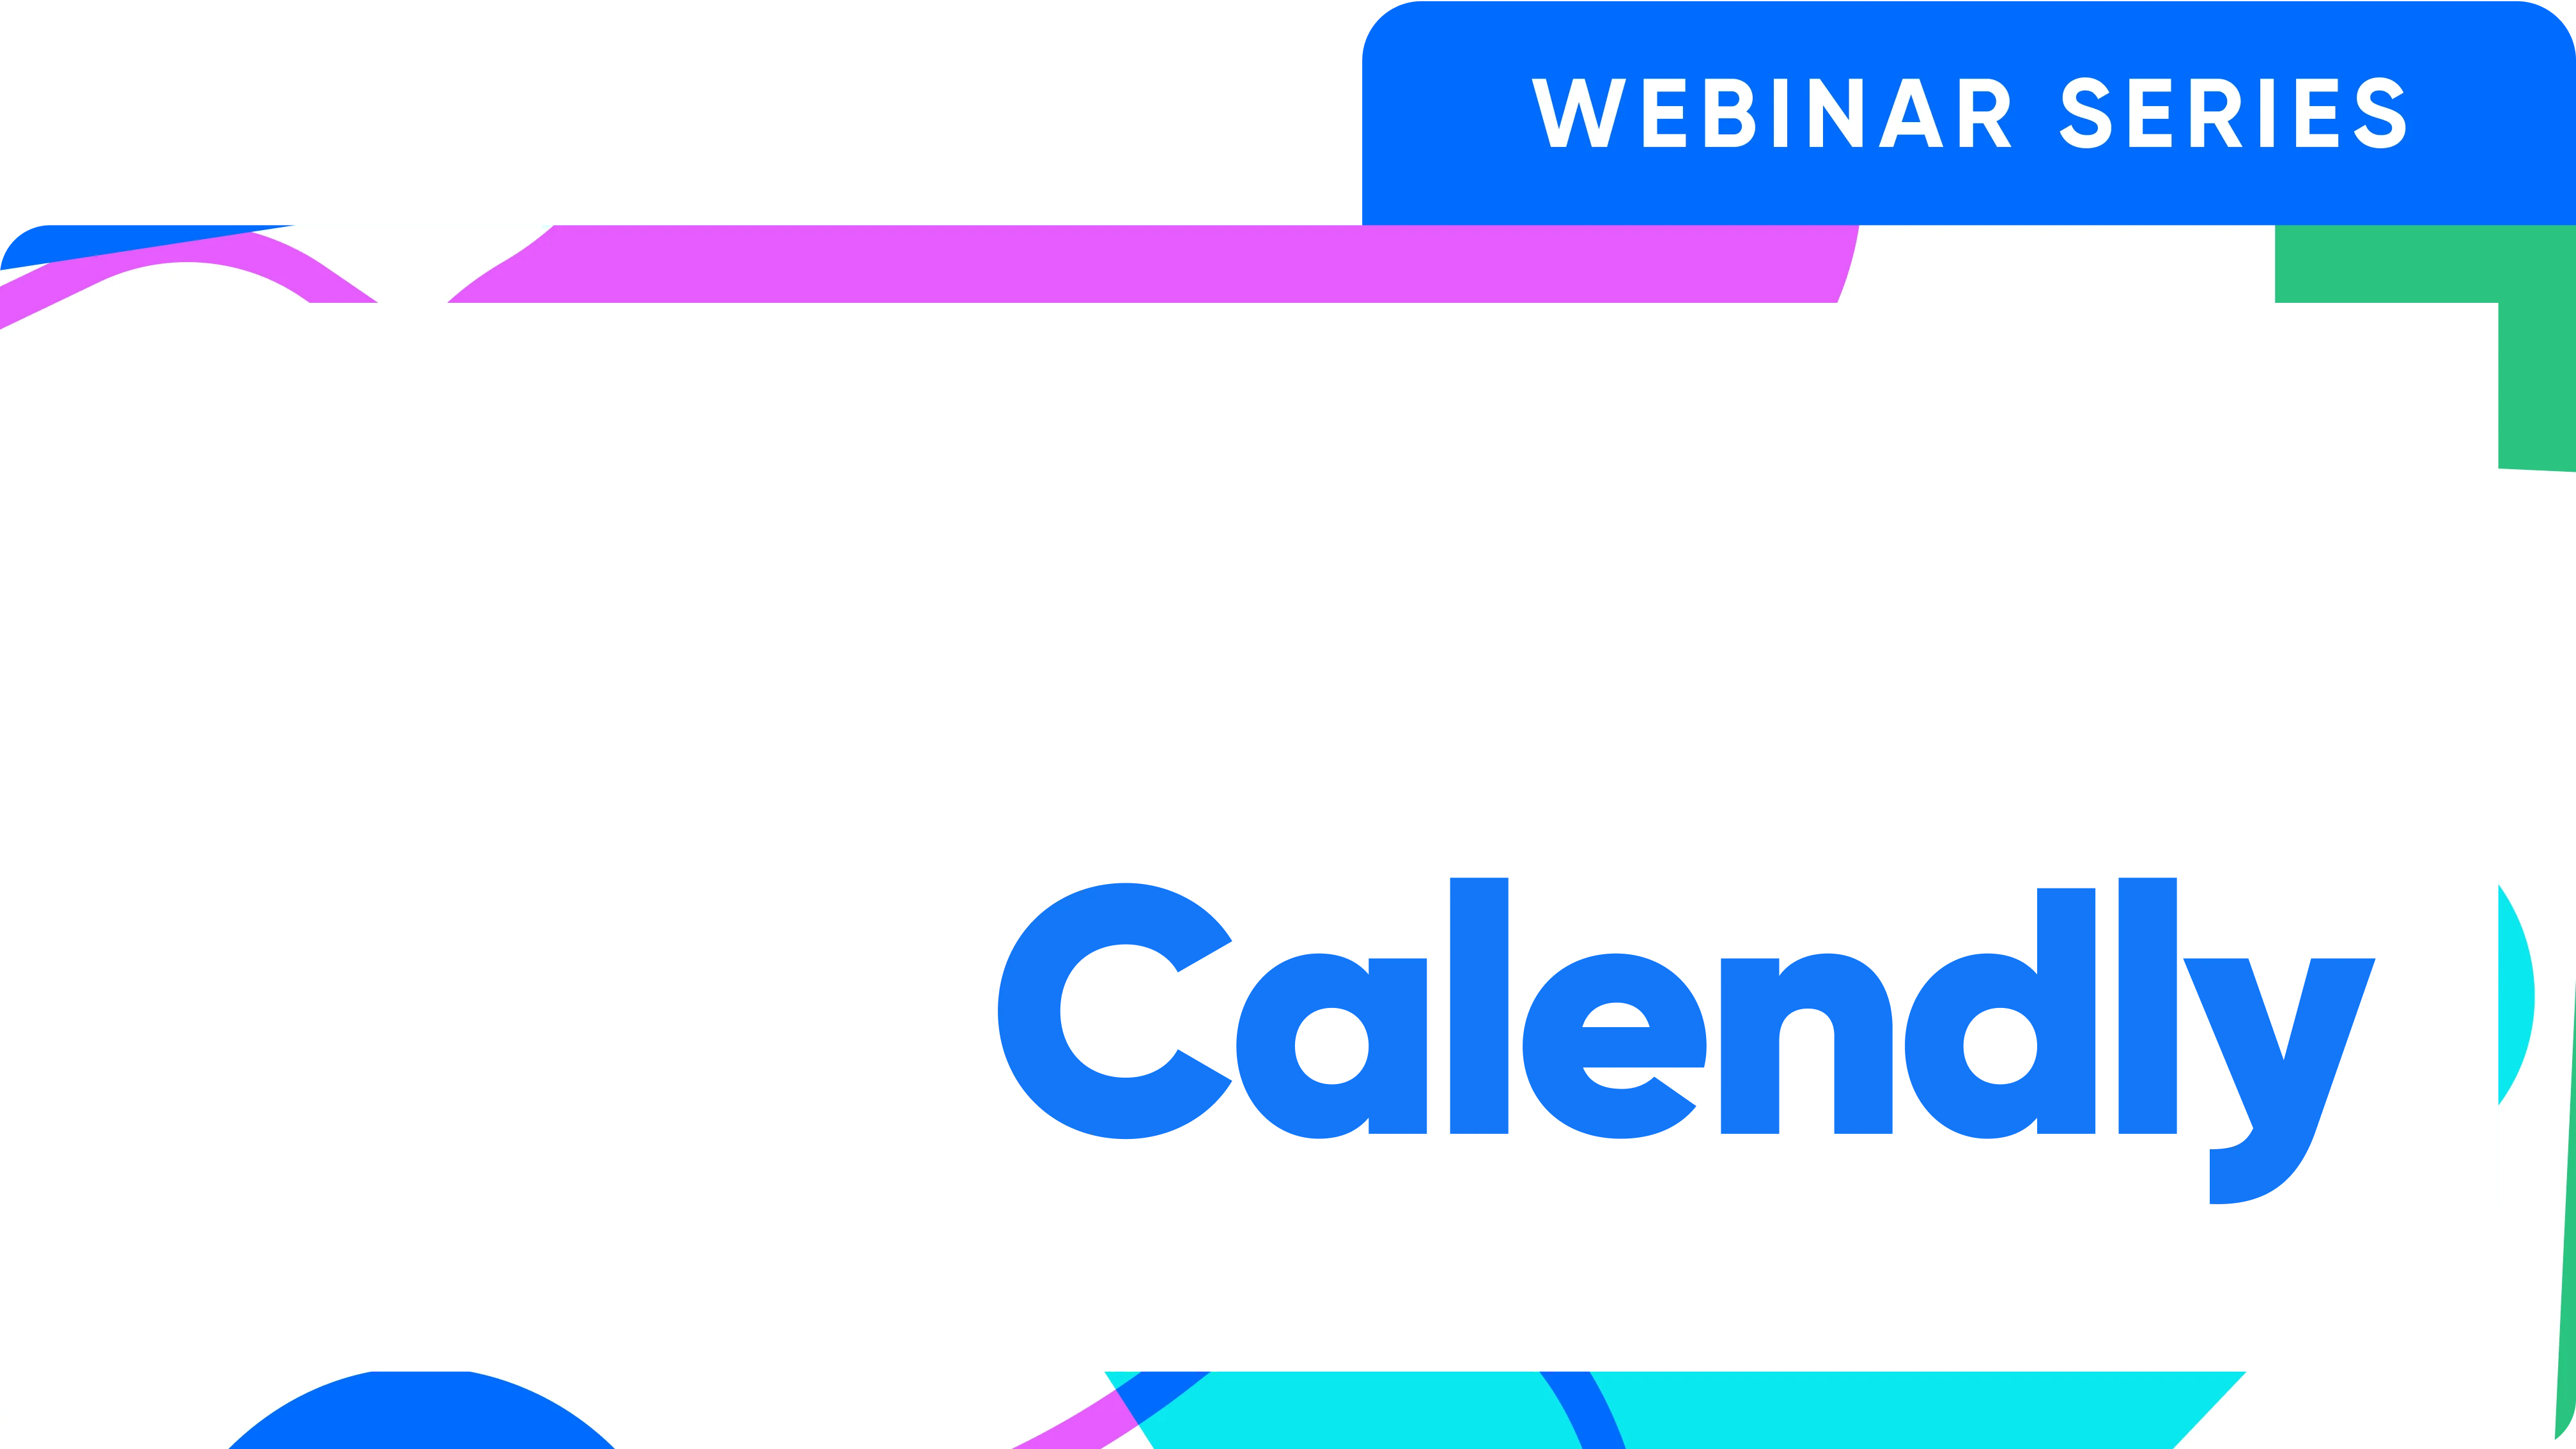 A webinar series for your entire team